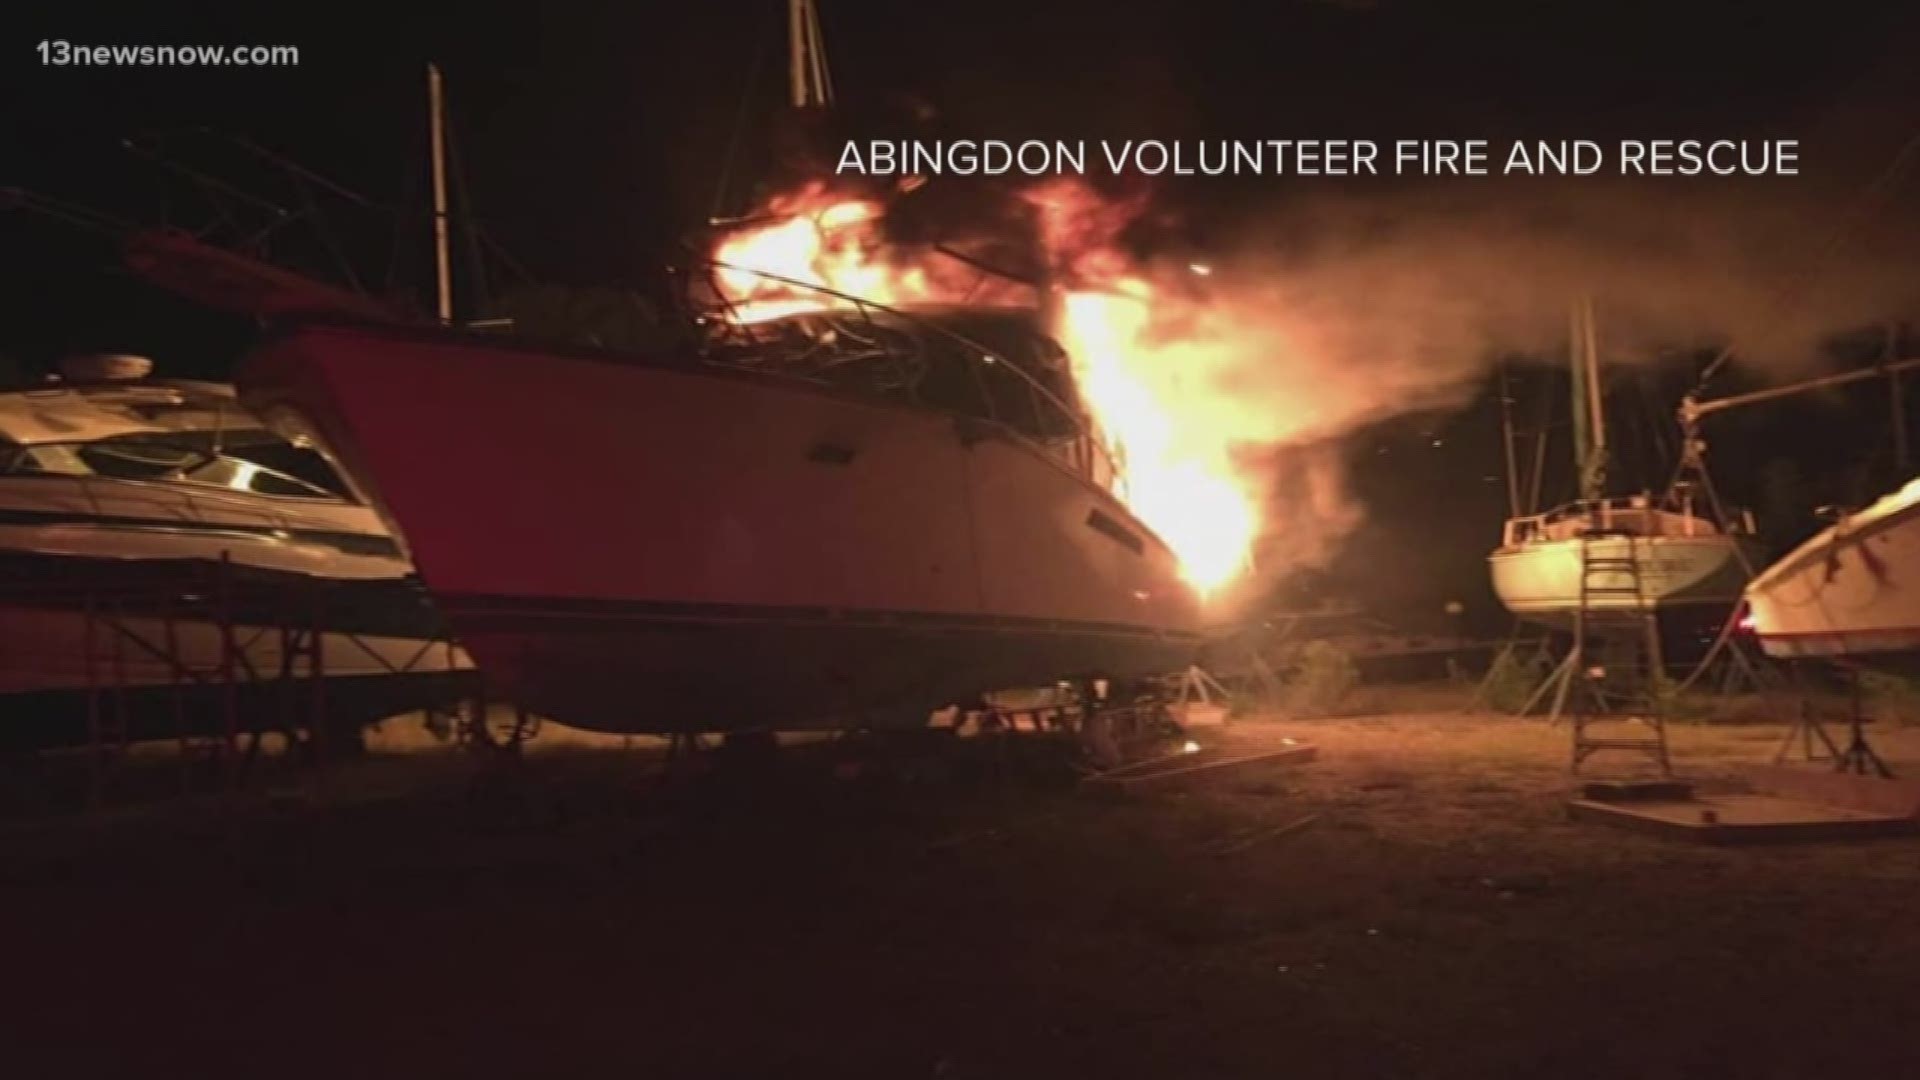 Abingdon Volunteer Fire and Rescue crews responded to the York River Yacht Haven for a boat fire. A 55-foot sport fisherman was burning in the boatyard.